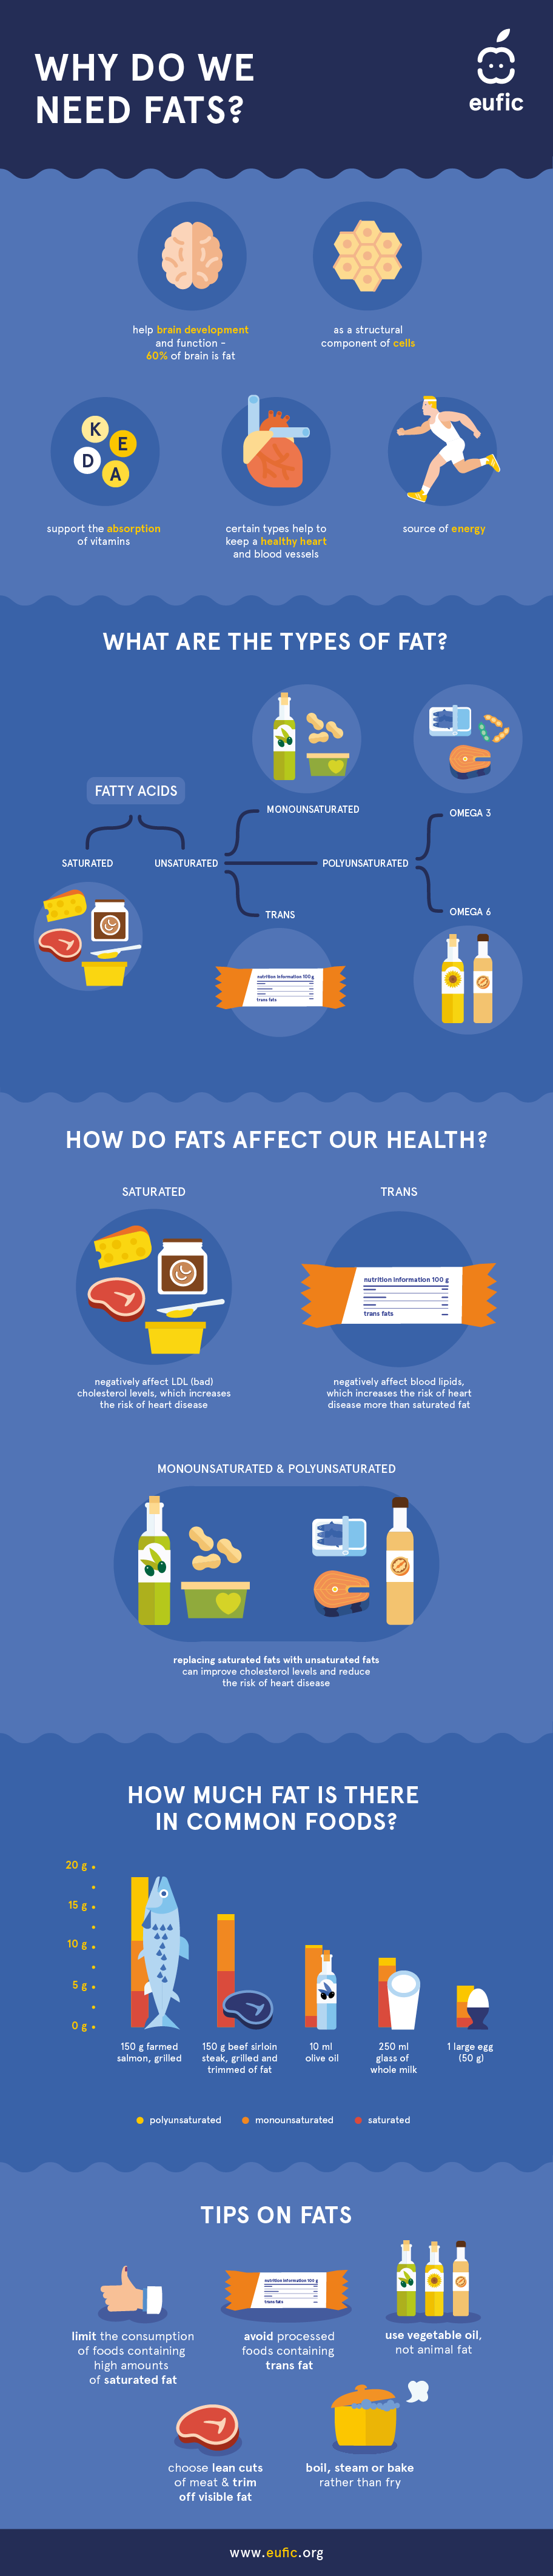 Dietary fats infographic